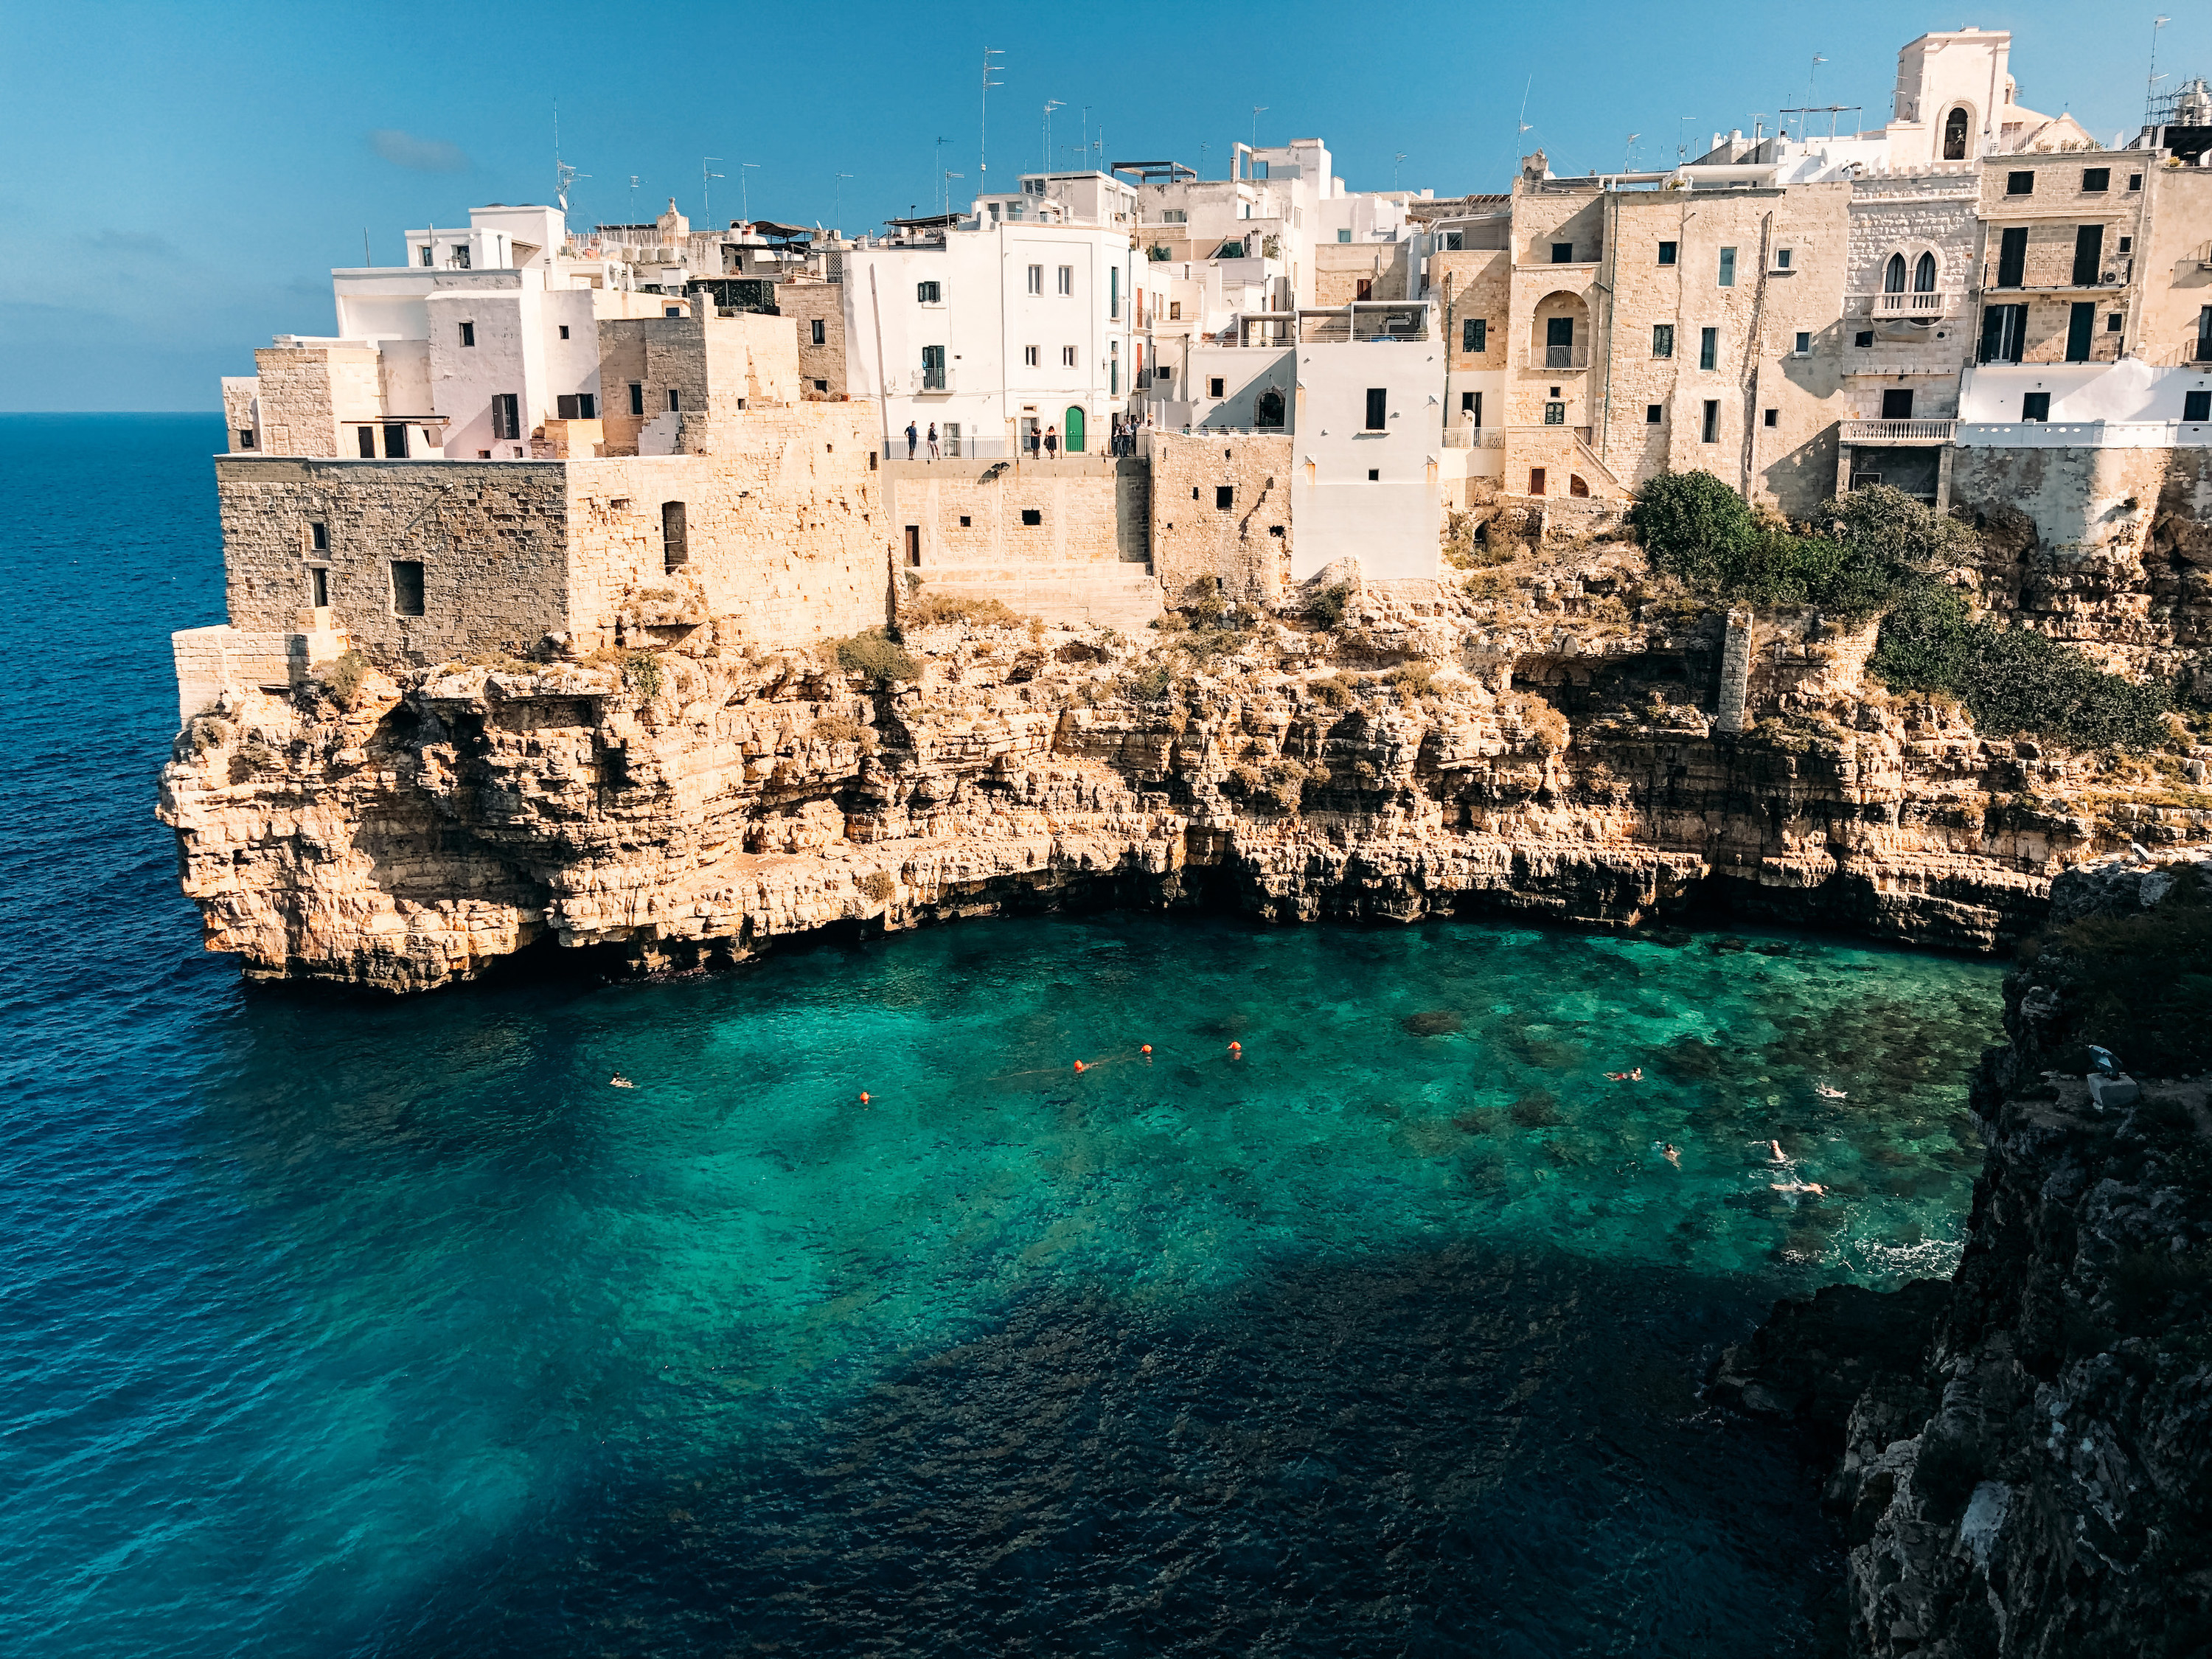 Buildings of polignano a mare built onto caves jutting out into the sea